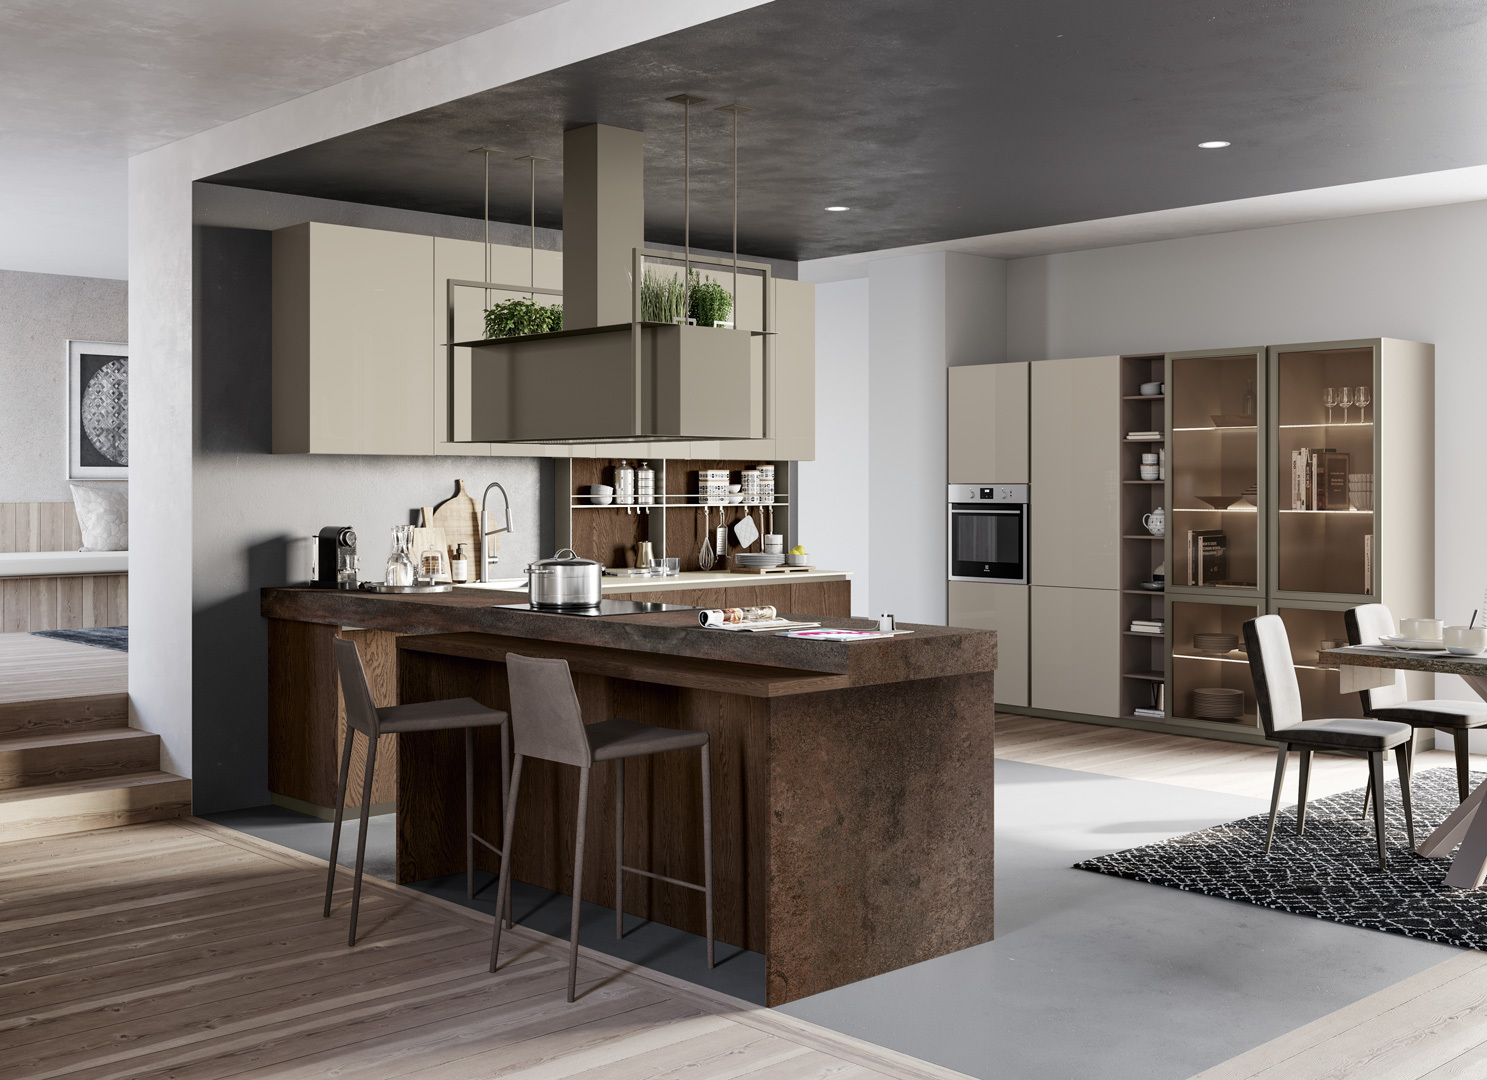 7961_creo-kitchens-tablet-wood-compo-1-2